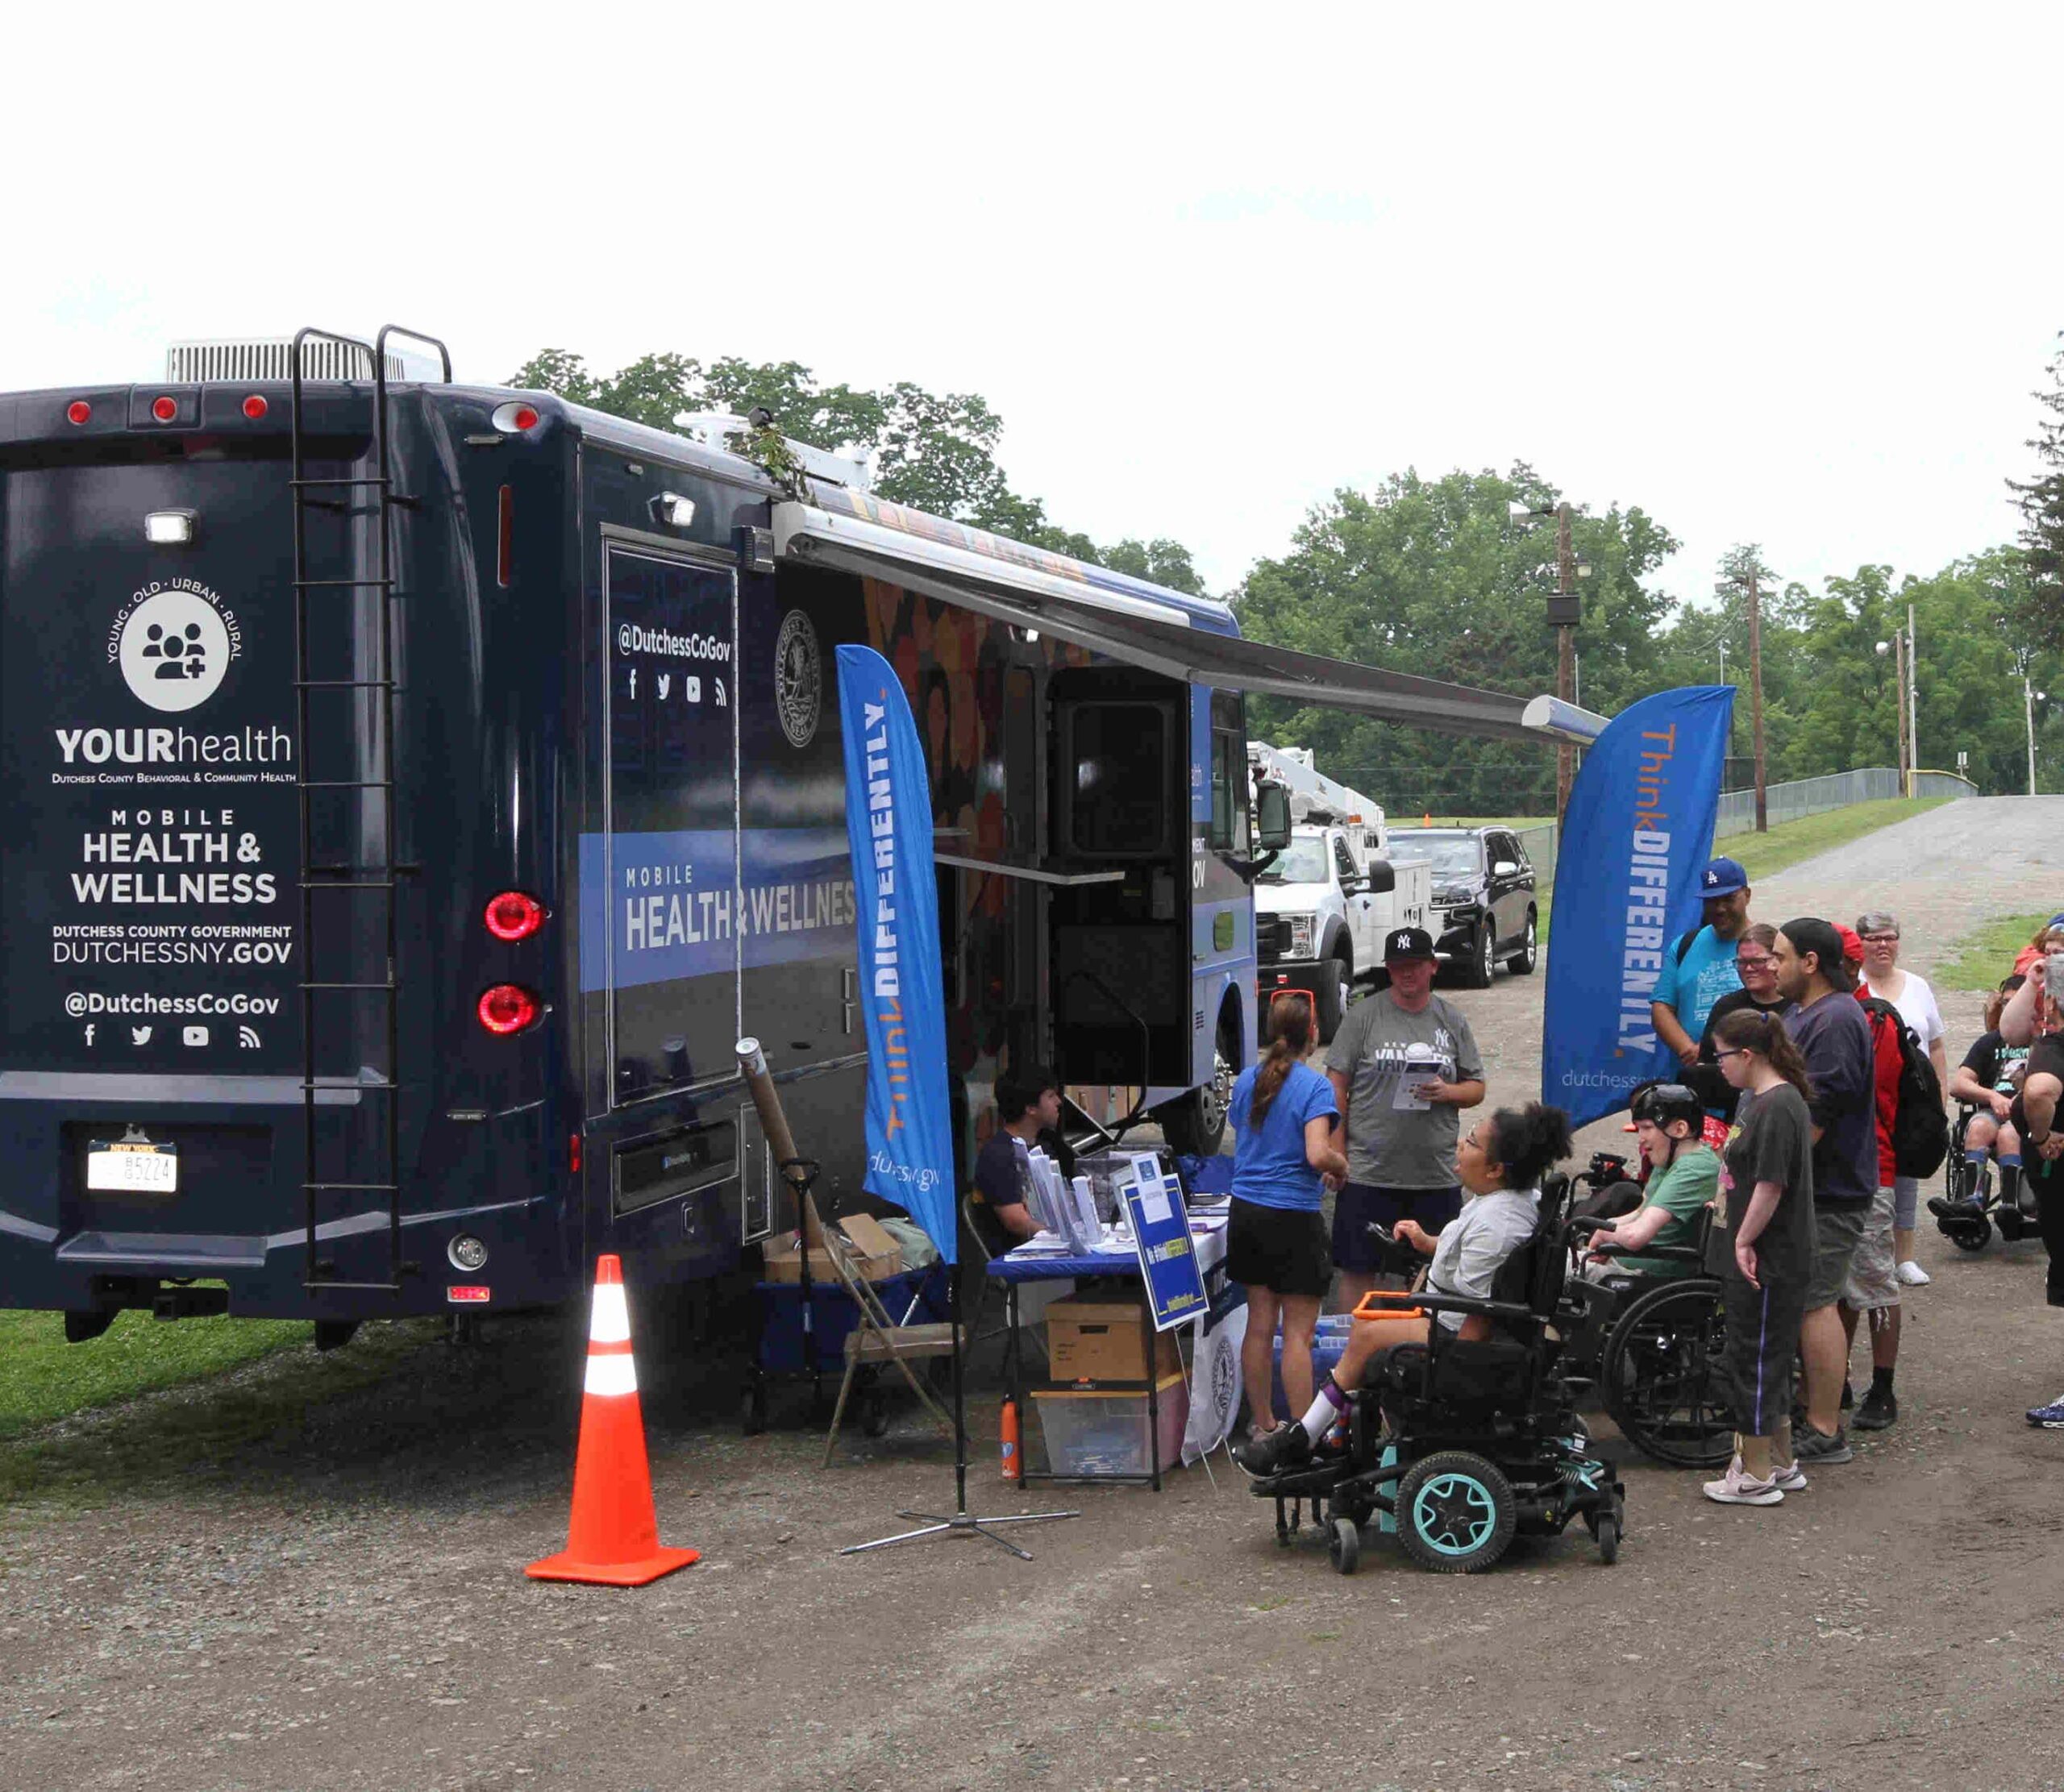 The Dutchess County Mobile Health & Wellness RV was on hand to provide information, resources, check in, and RV tours at the 3rd Annual ThinkDIFFERENTLY Fitness & Field Day on Friday June 29, 2023 at Bowdoin Park. In this picture the large 40’ long Navy Blue shows off the back and passenger side details, which include white writing noting “YOUR Health (Young, Old, Urban, Rural), Dutchess County Government Dutchessny.gov and social media handle of @dutchesscogov. Along the passenger side of the RV about 15 people stand around the tables of resources and check in for the ThinkDIFFERENTLY Fitness and Field Day.